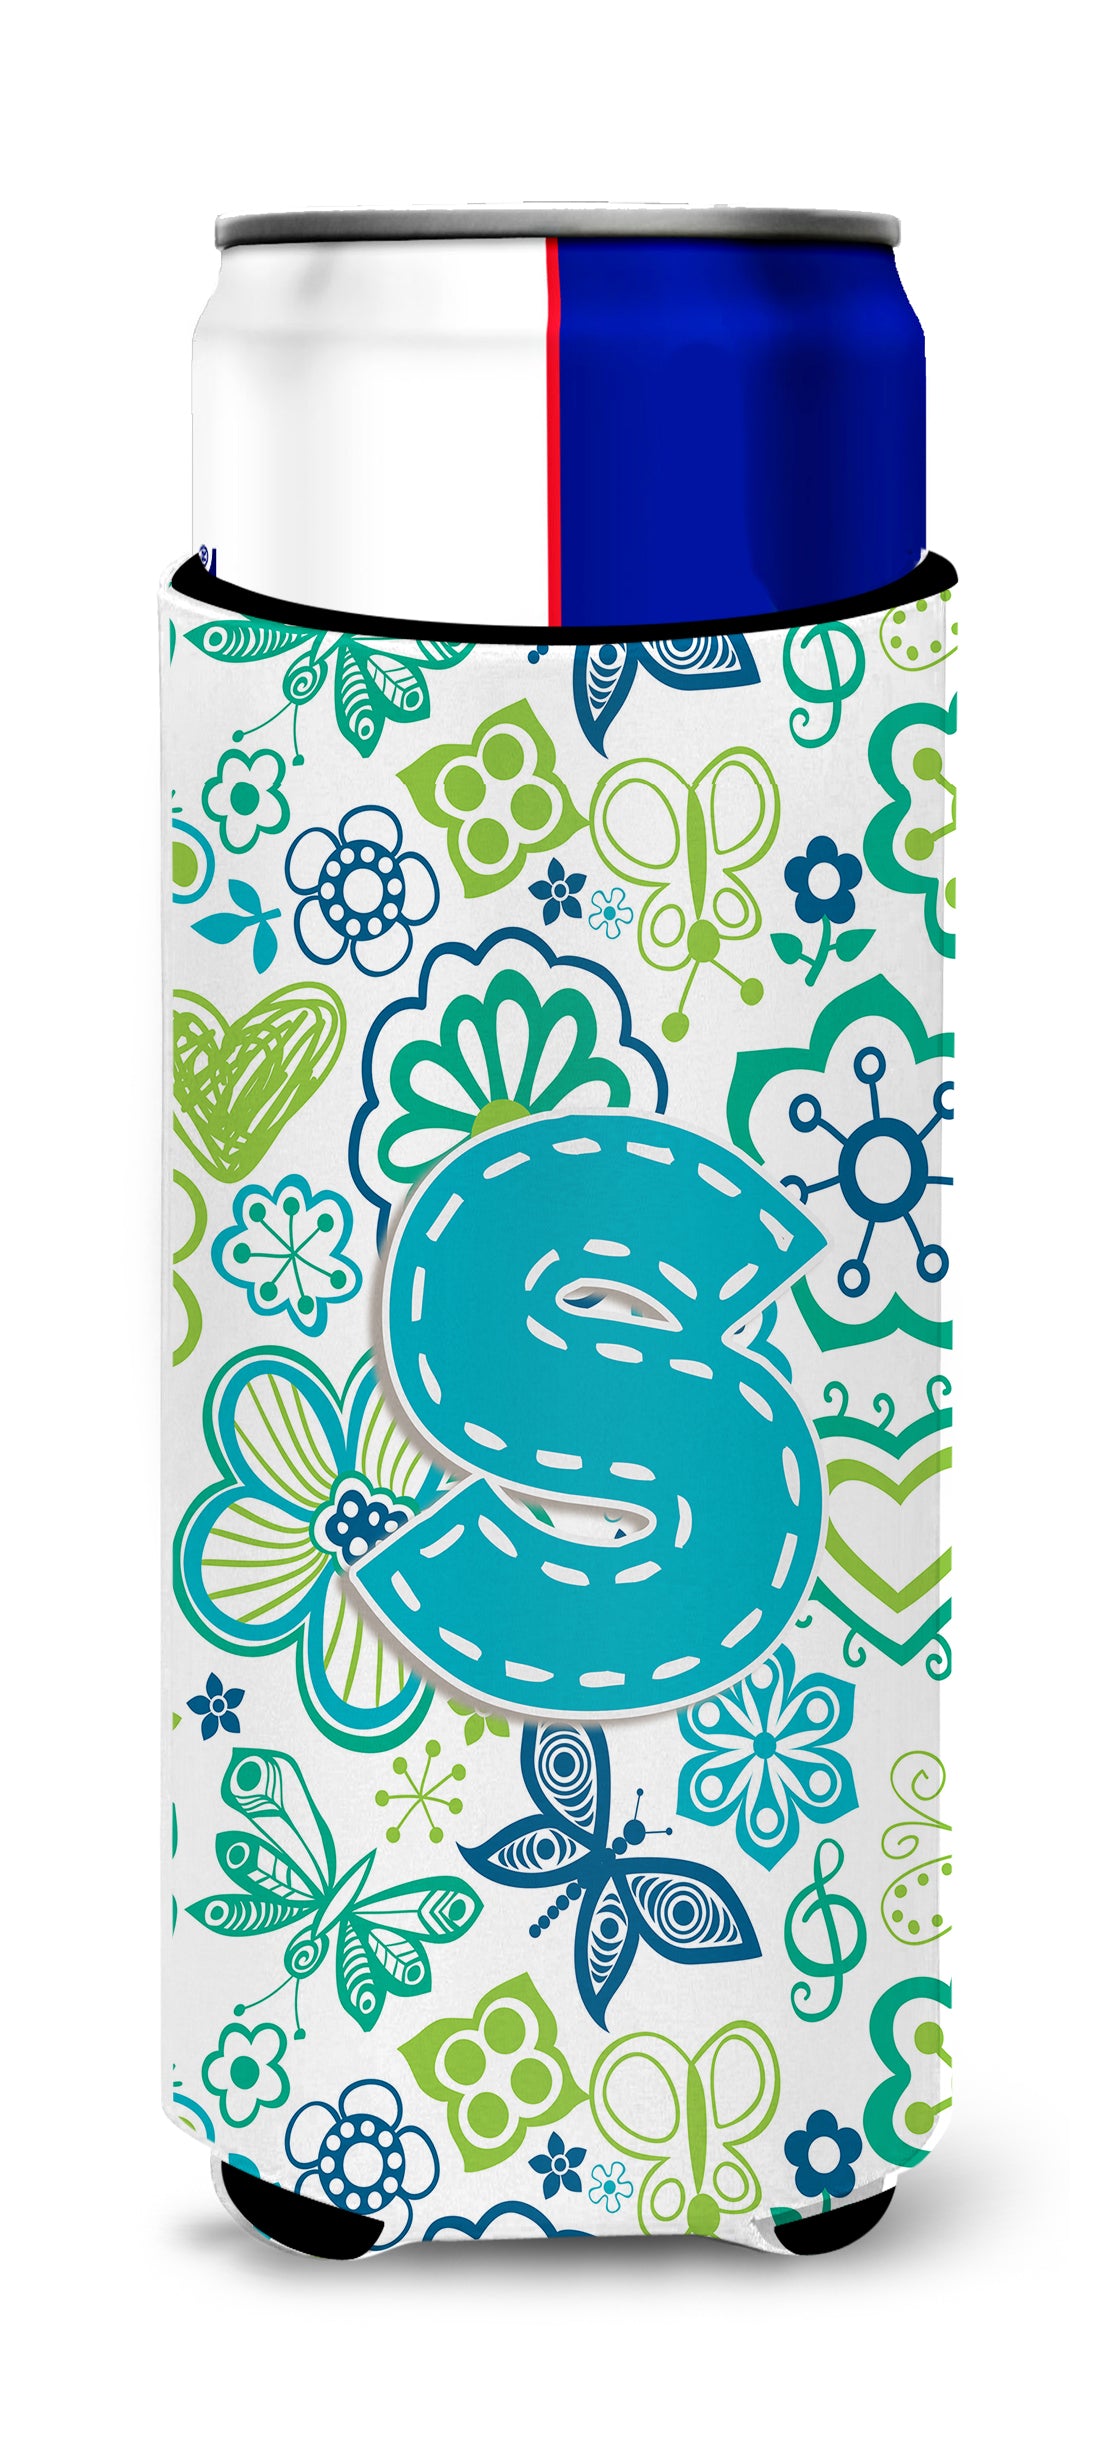 Letter S Flowers and Butterflies Teal Blue Ultra Beverage Insulators for slim cans CJ2006-SMUK